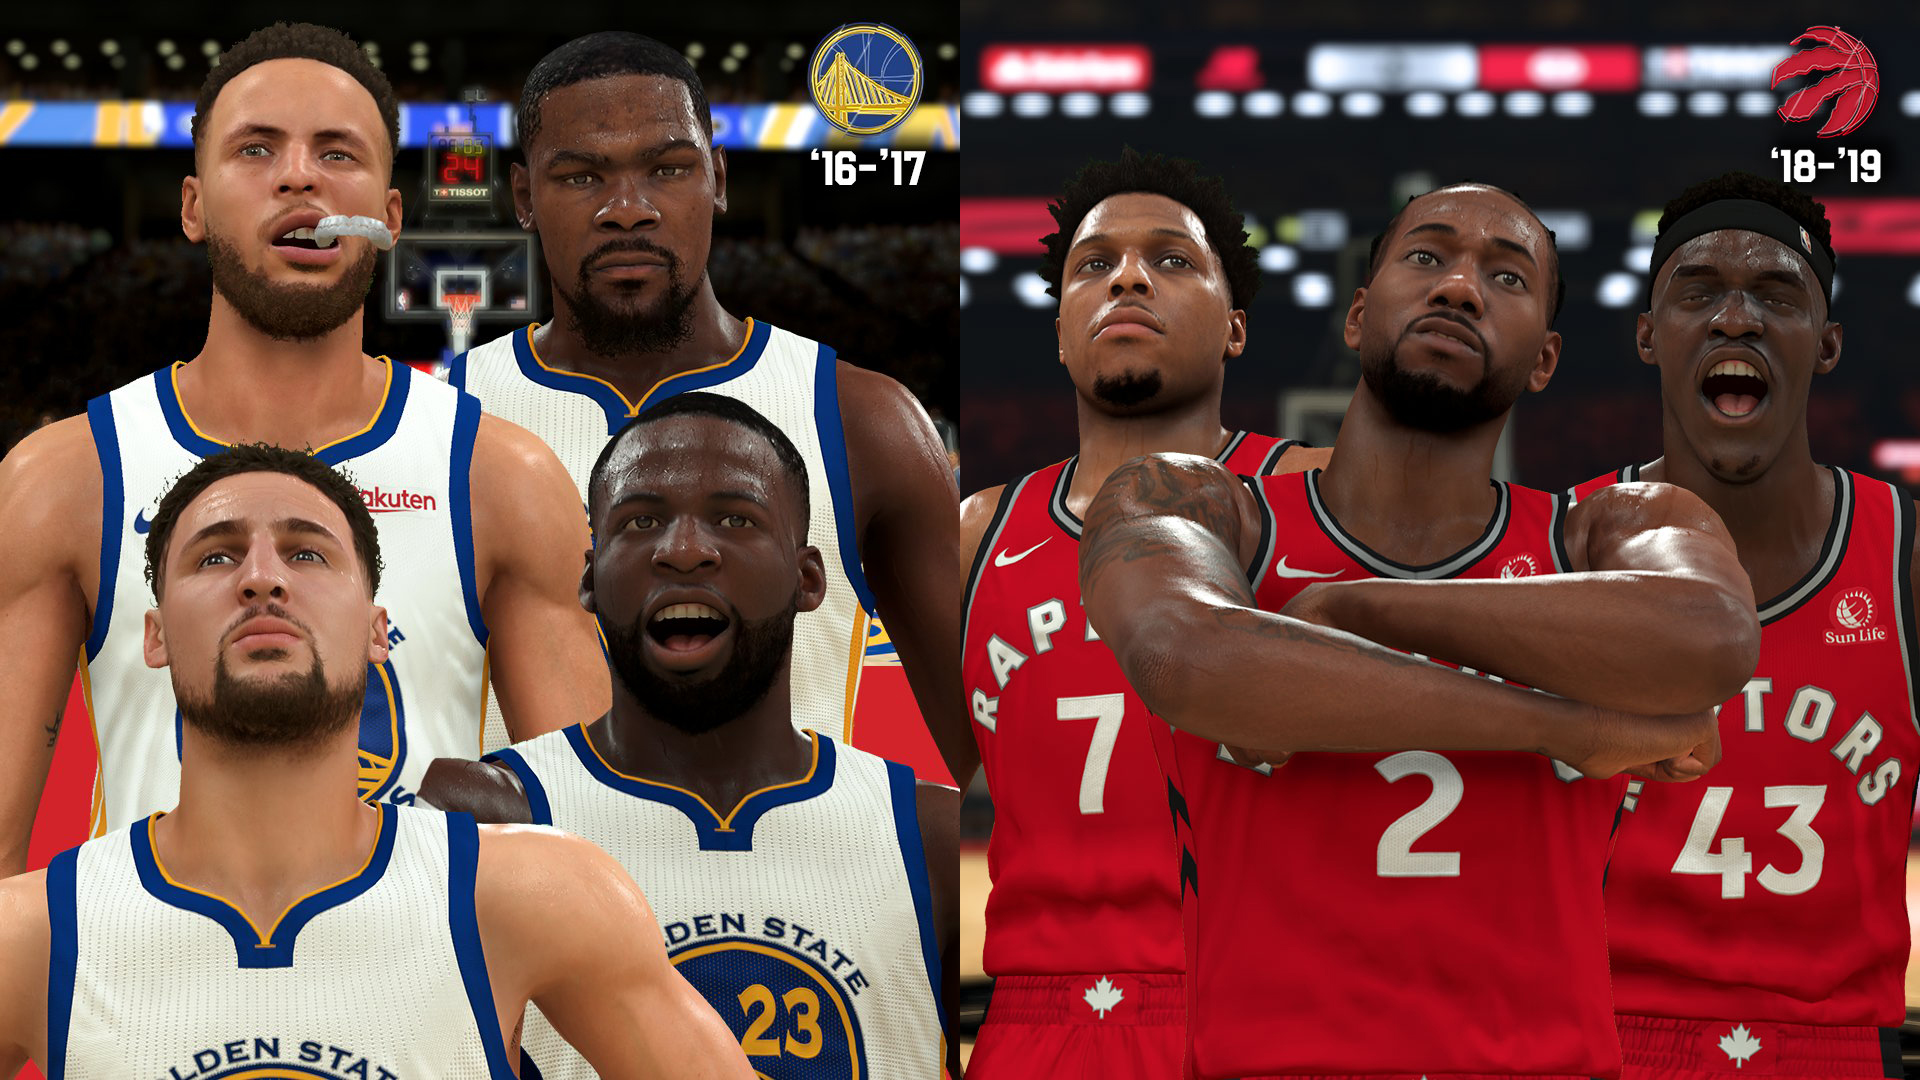 NBA 2K19: 93-94 Houston Rockets Player Ratings and Roster